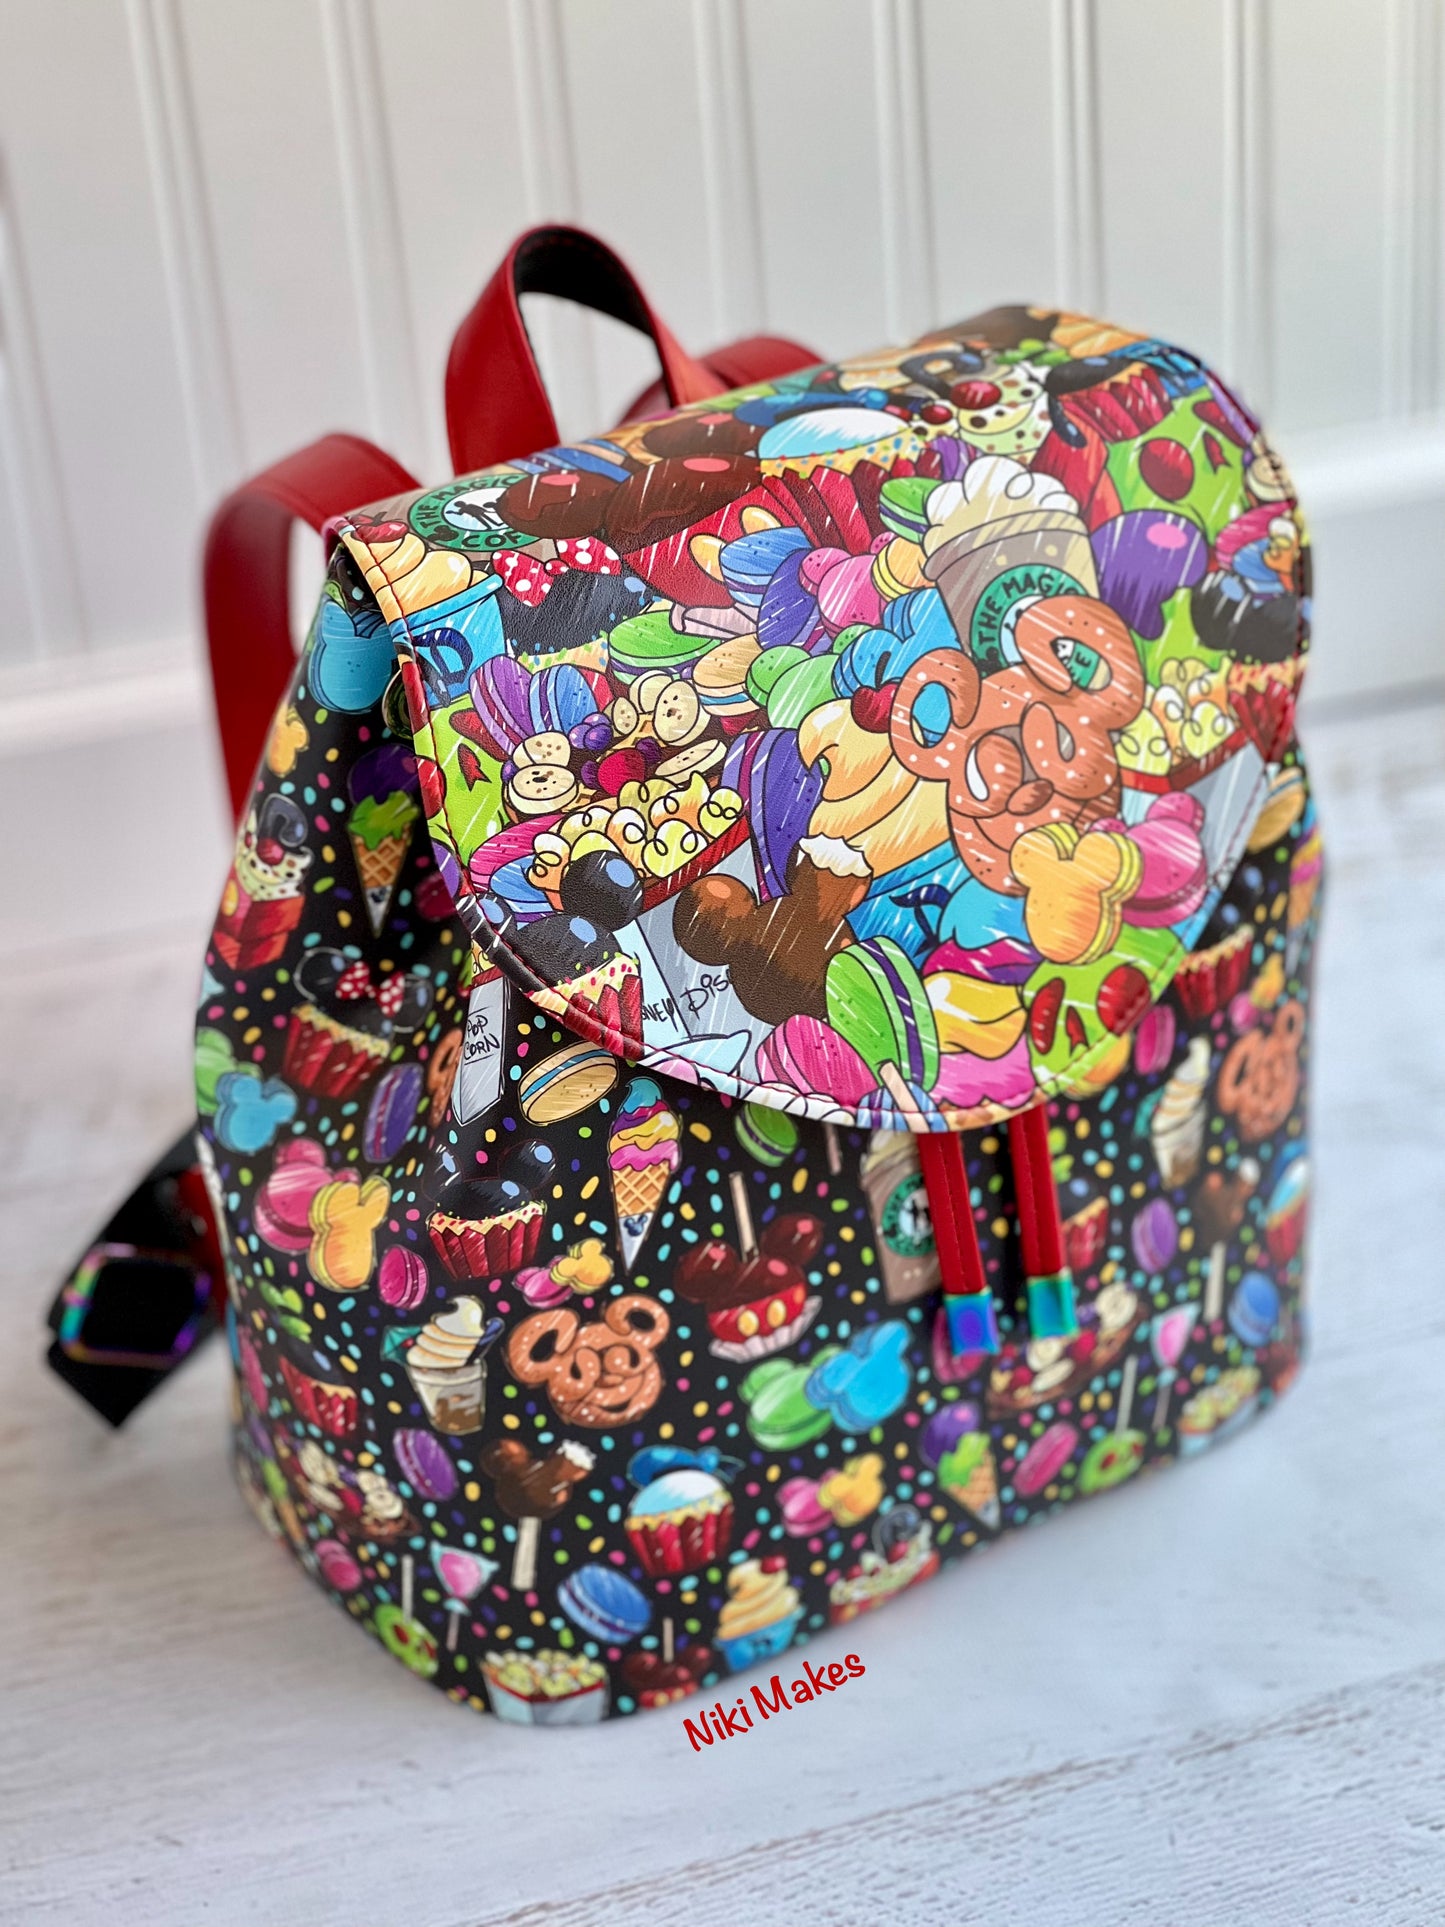 The Mayfield Backpack PDF Pattern